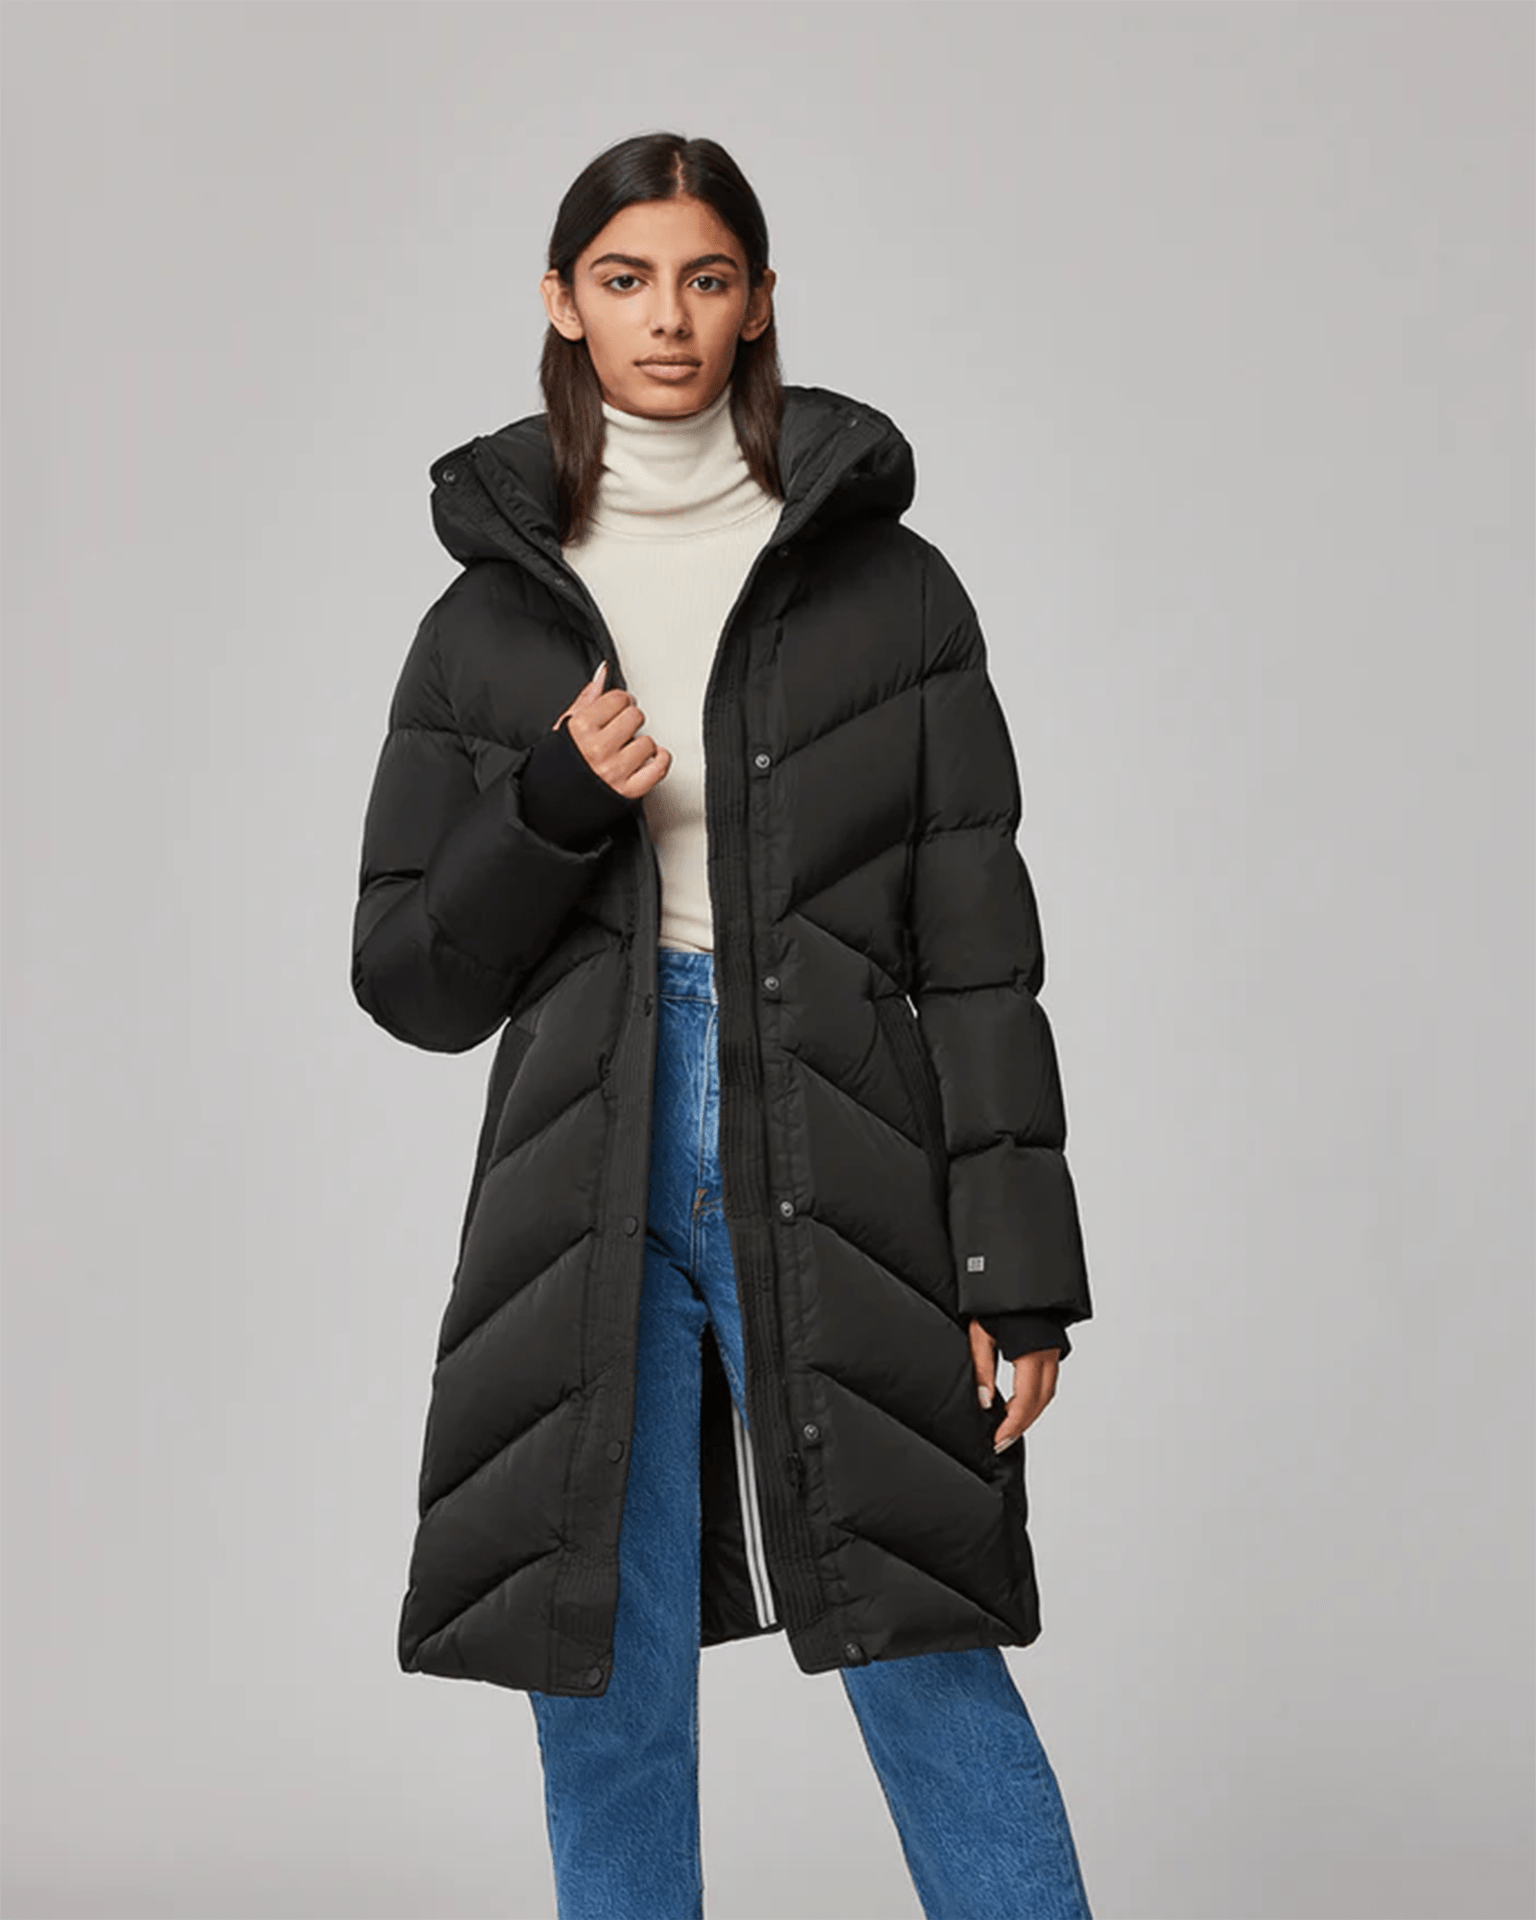 Bryanna Semi-Fitted Knee-Length Puffer in Black – Bliss Boutiques